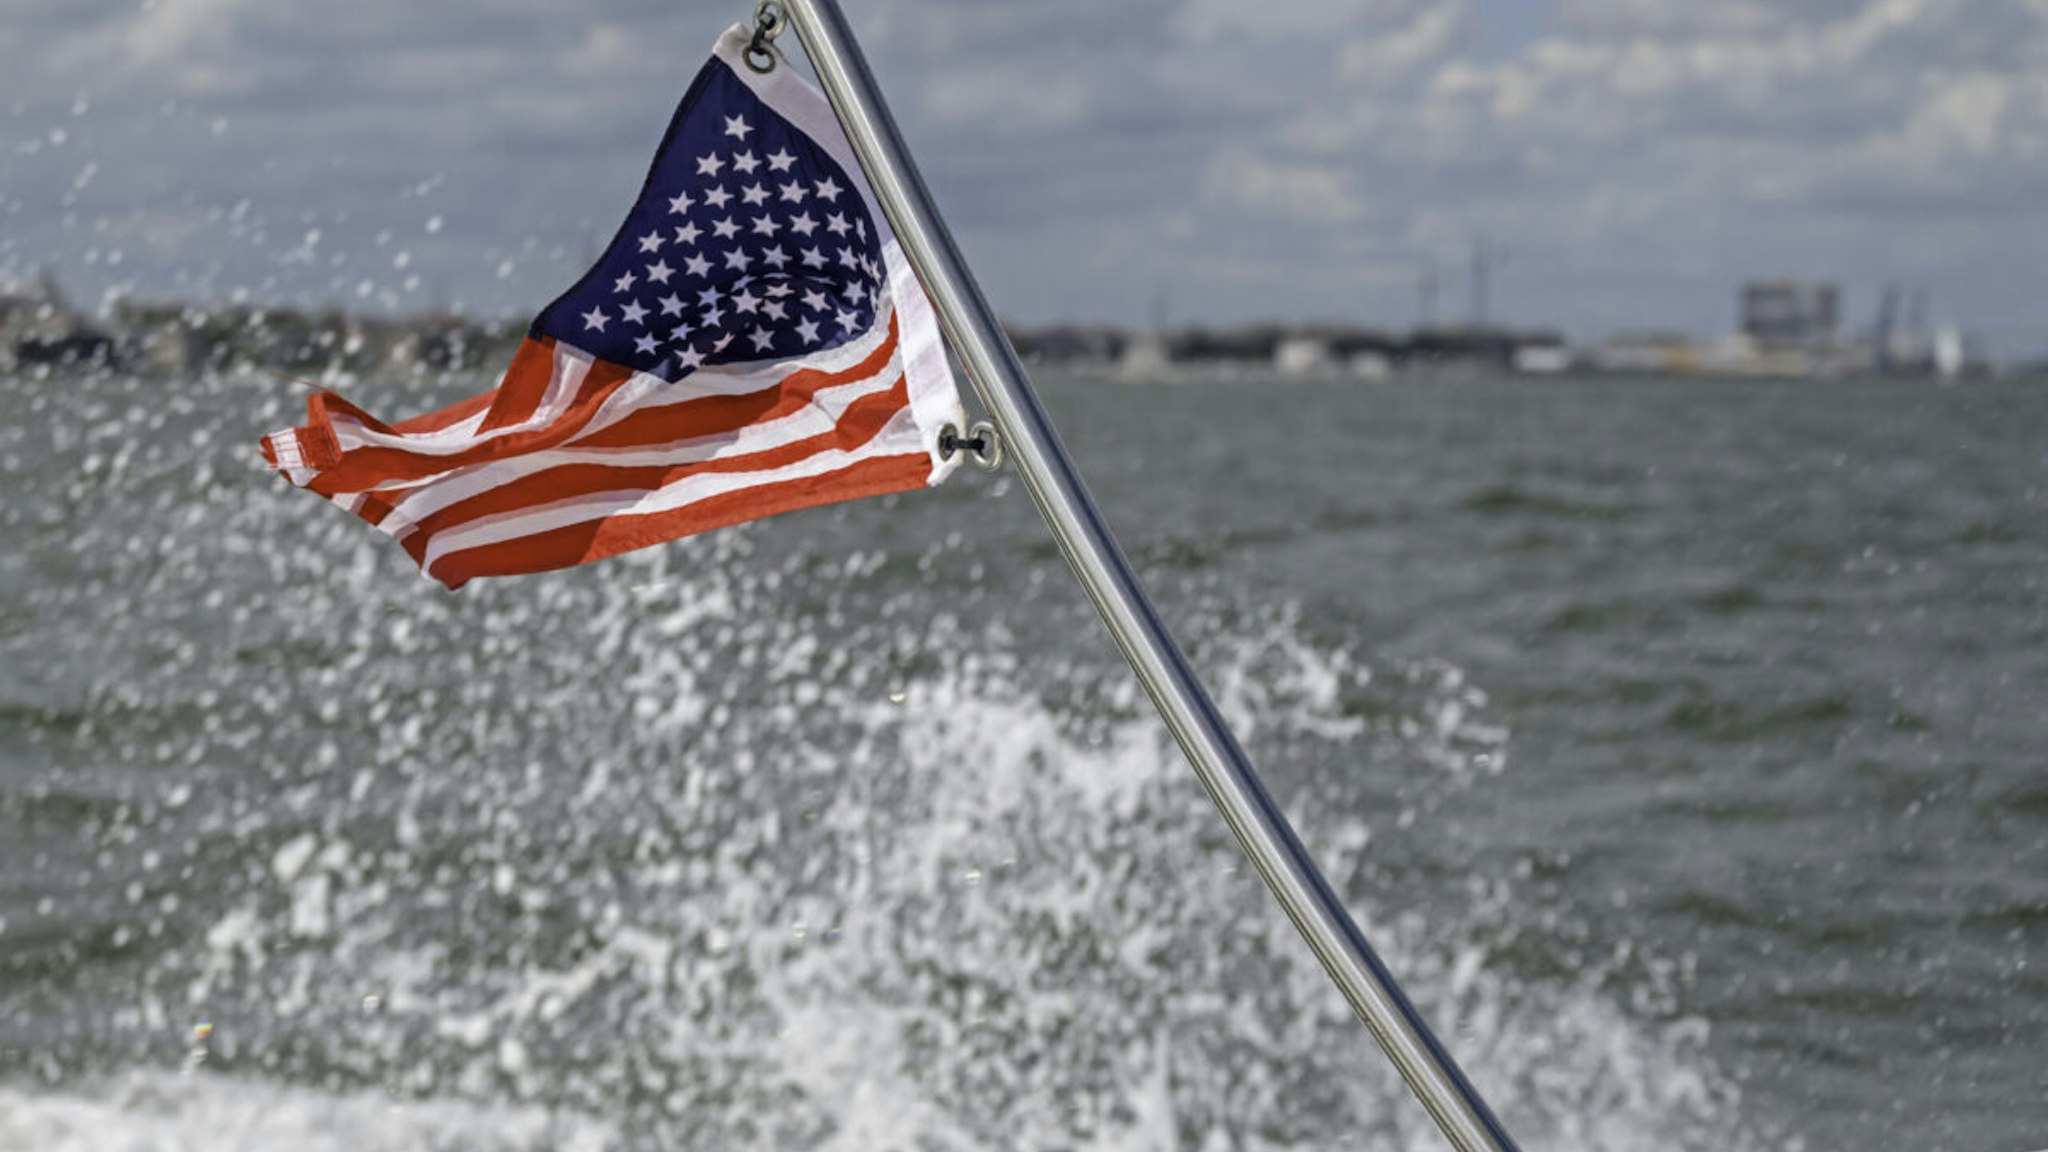 American flag flapping in the wind at the stern of a boat, showing water splashing and coastline in the background.